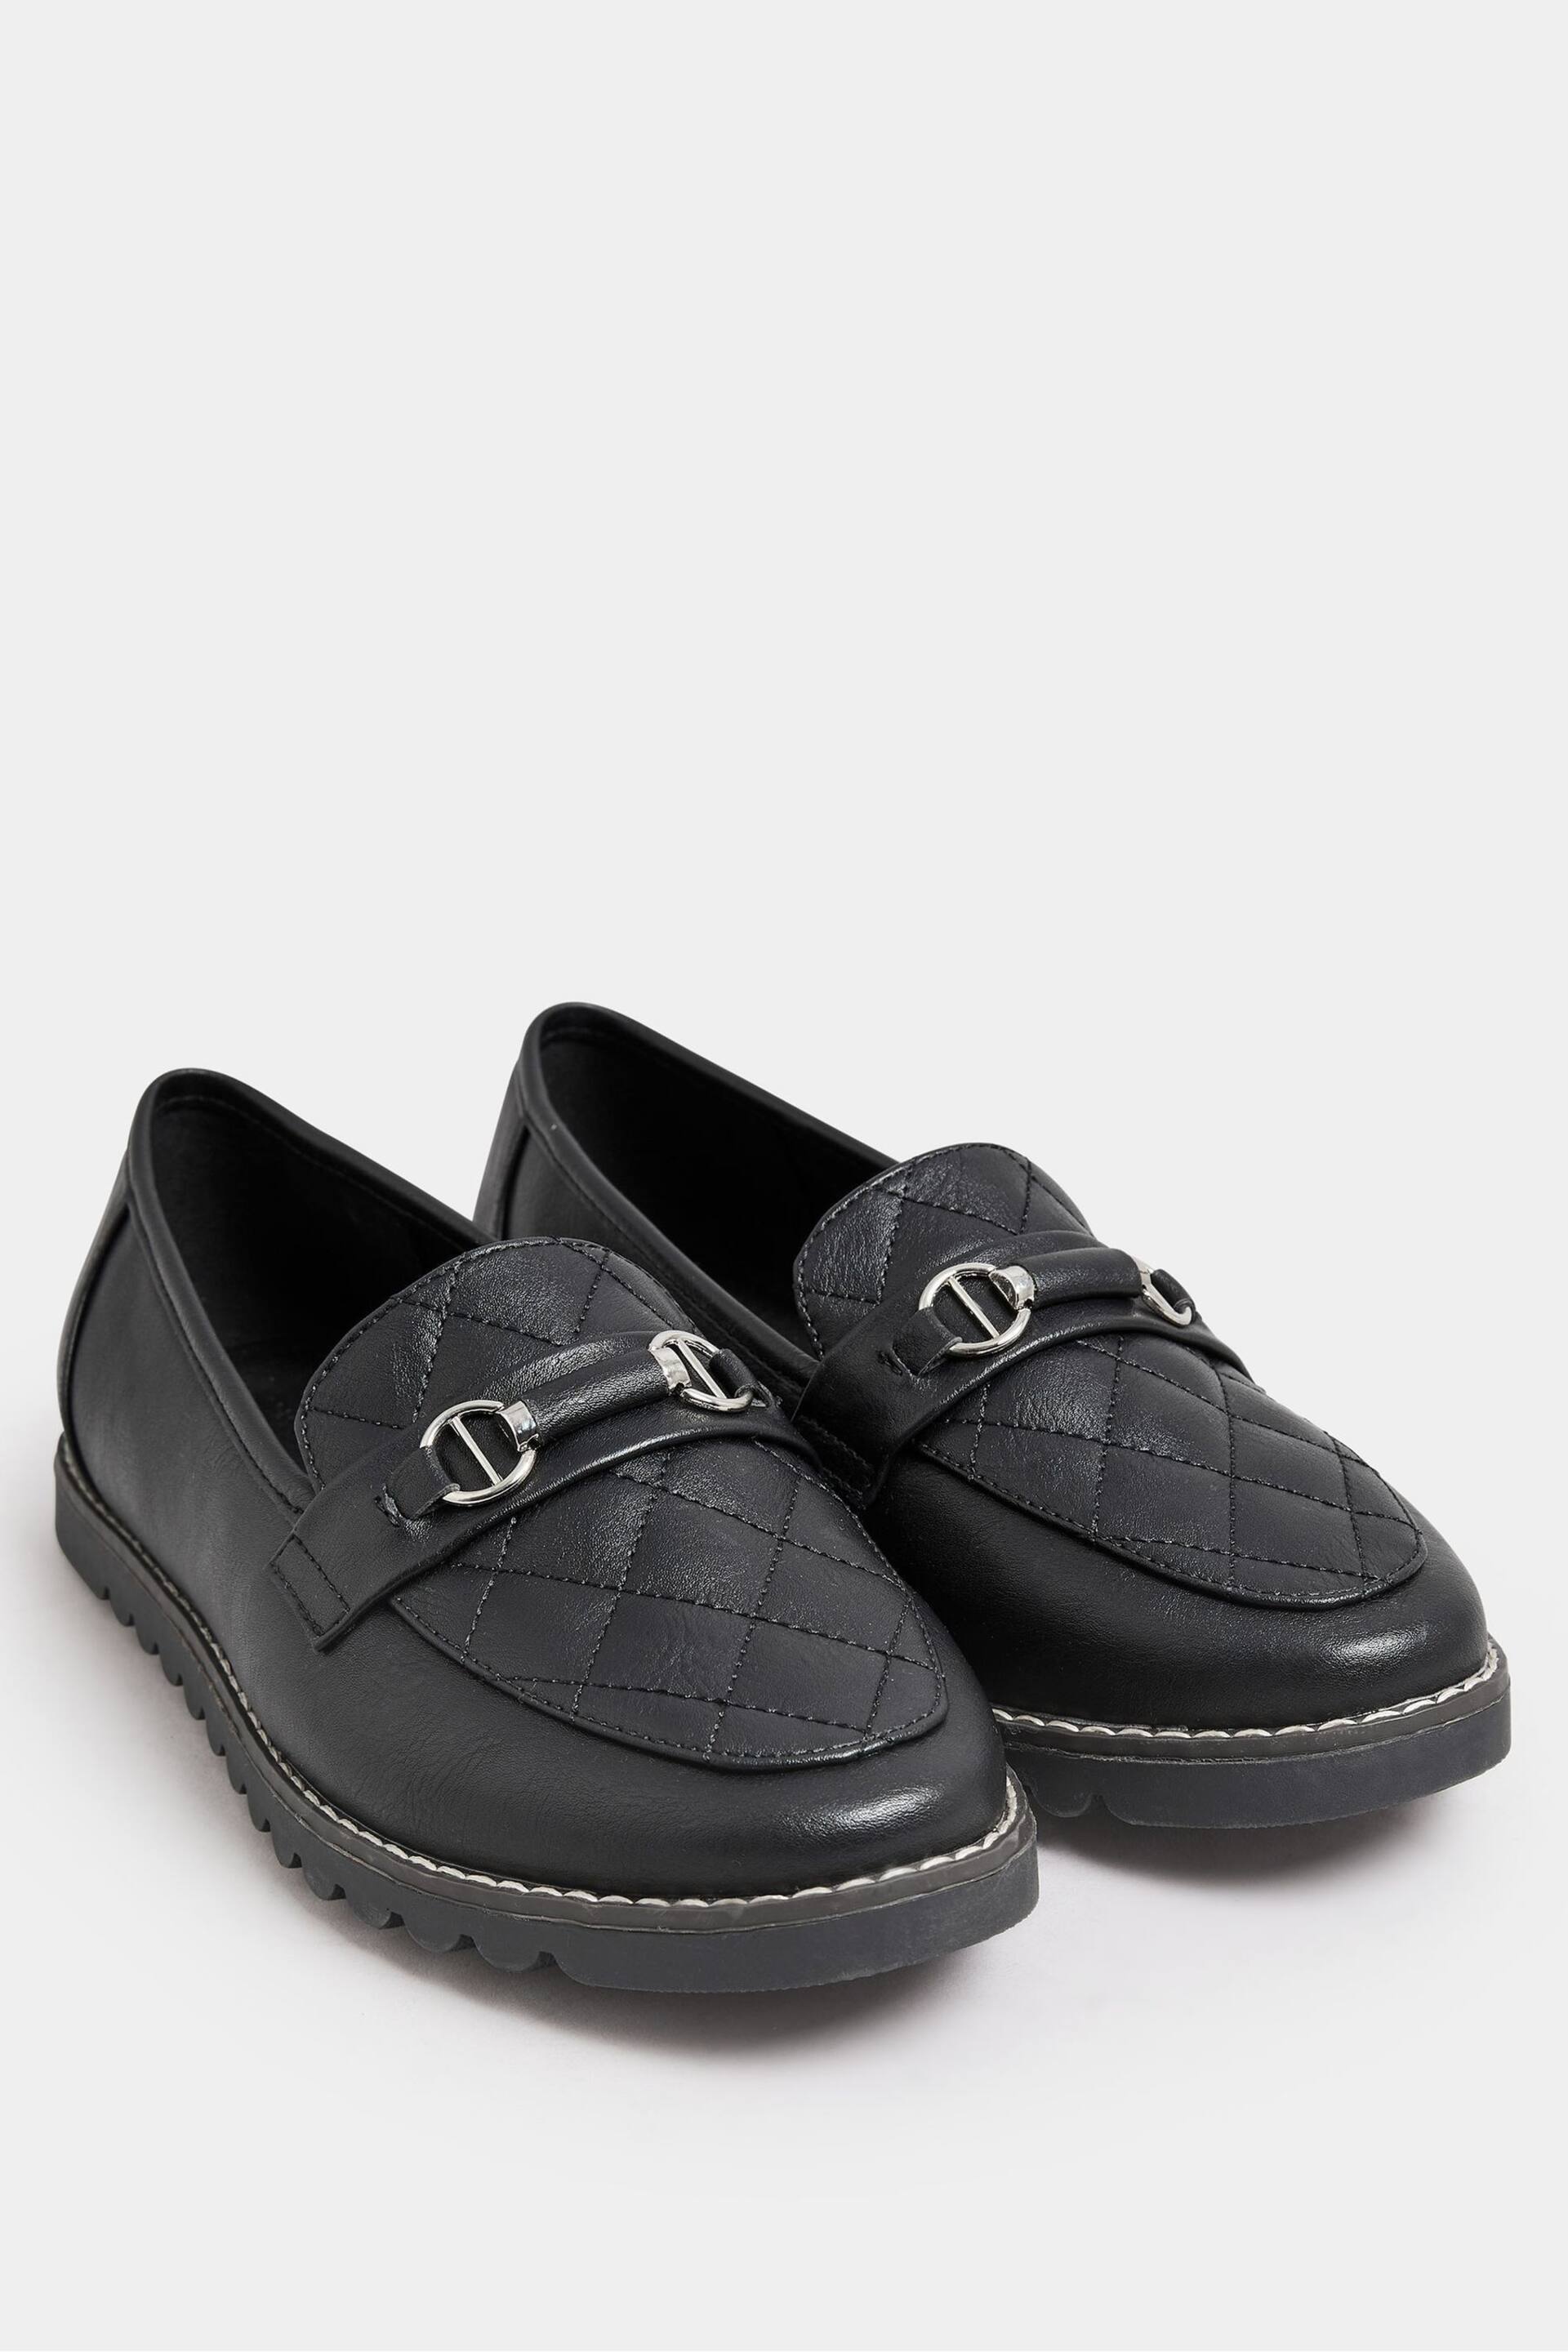 Yours Curve Black Extra Wide Fit Quilted Loafers - Image 2 of 5